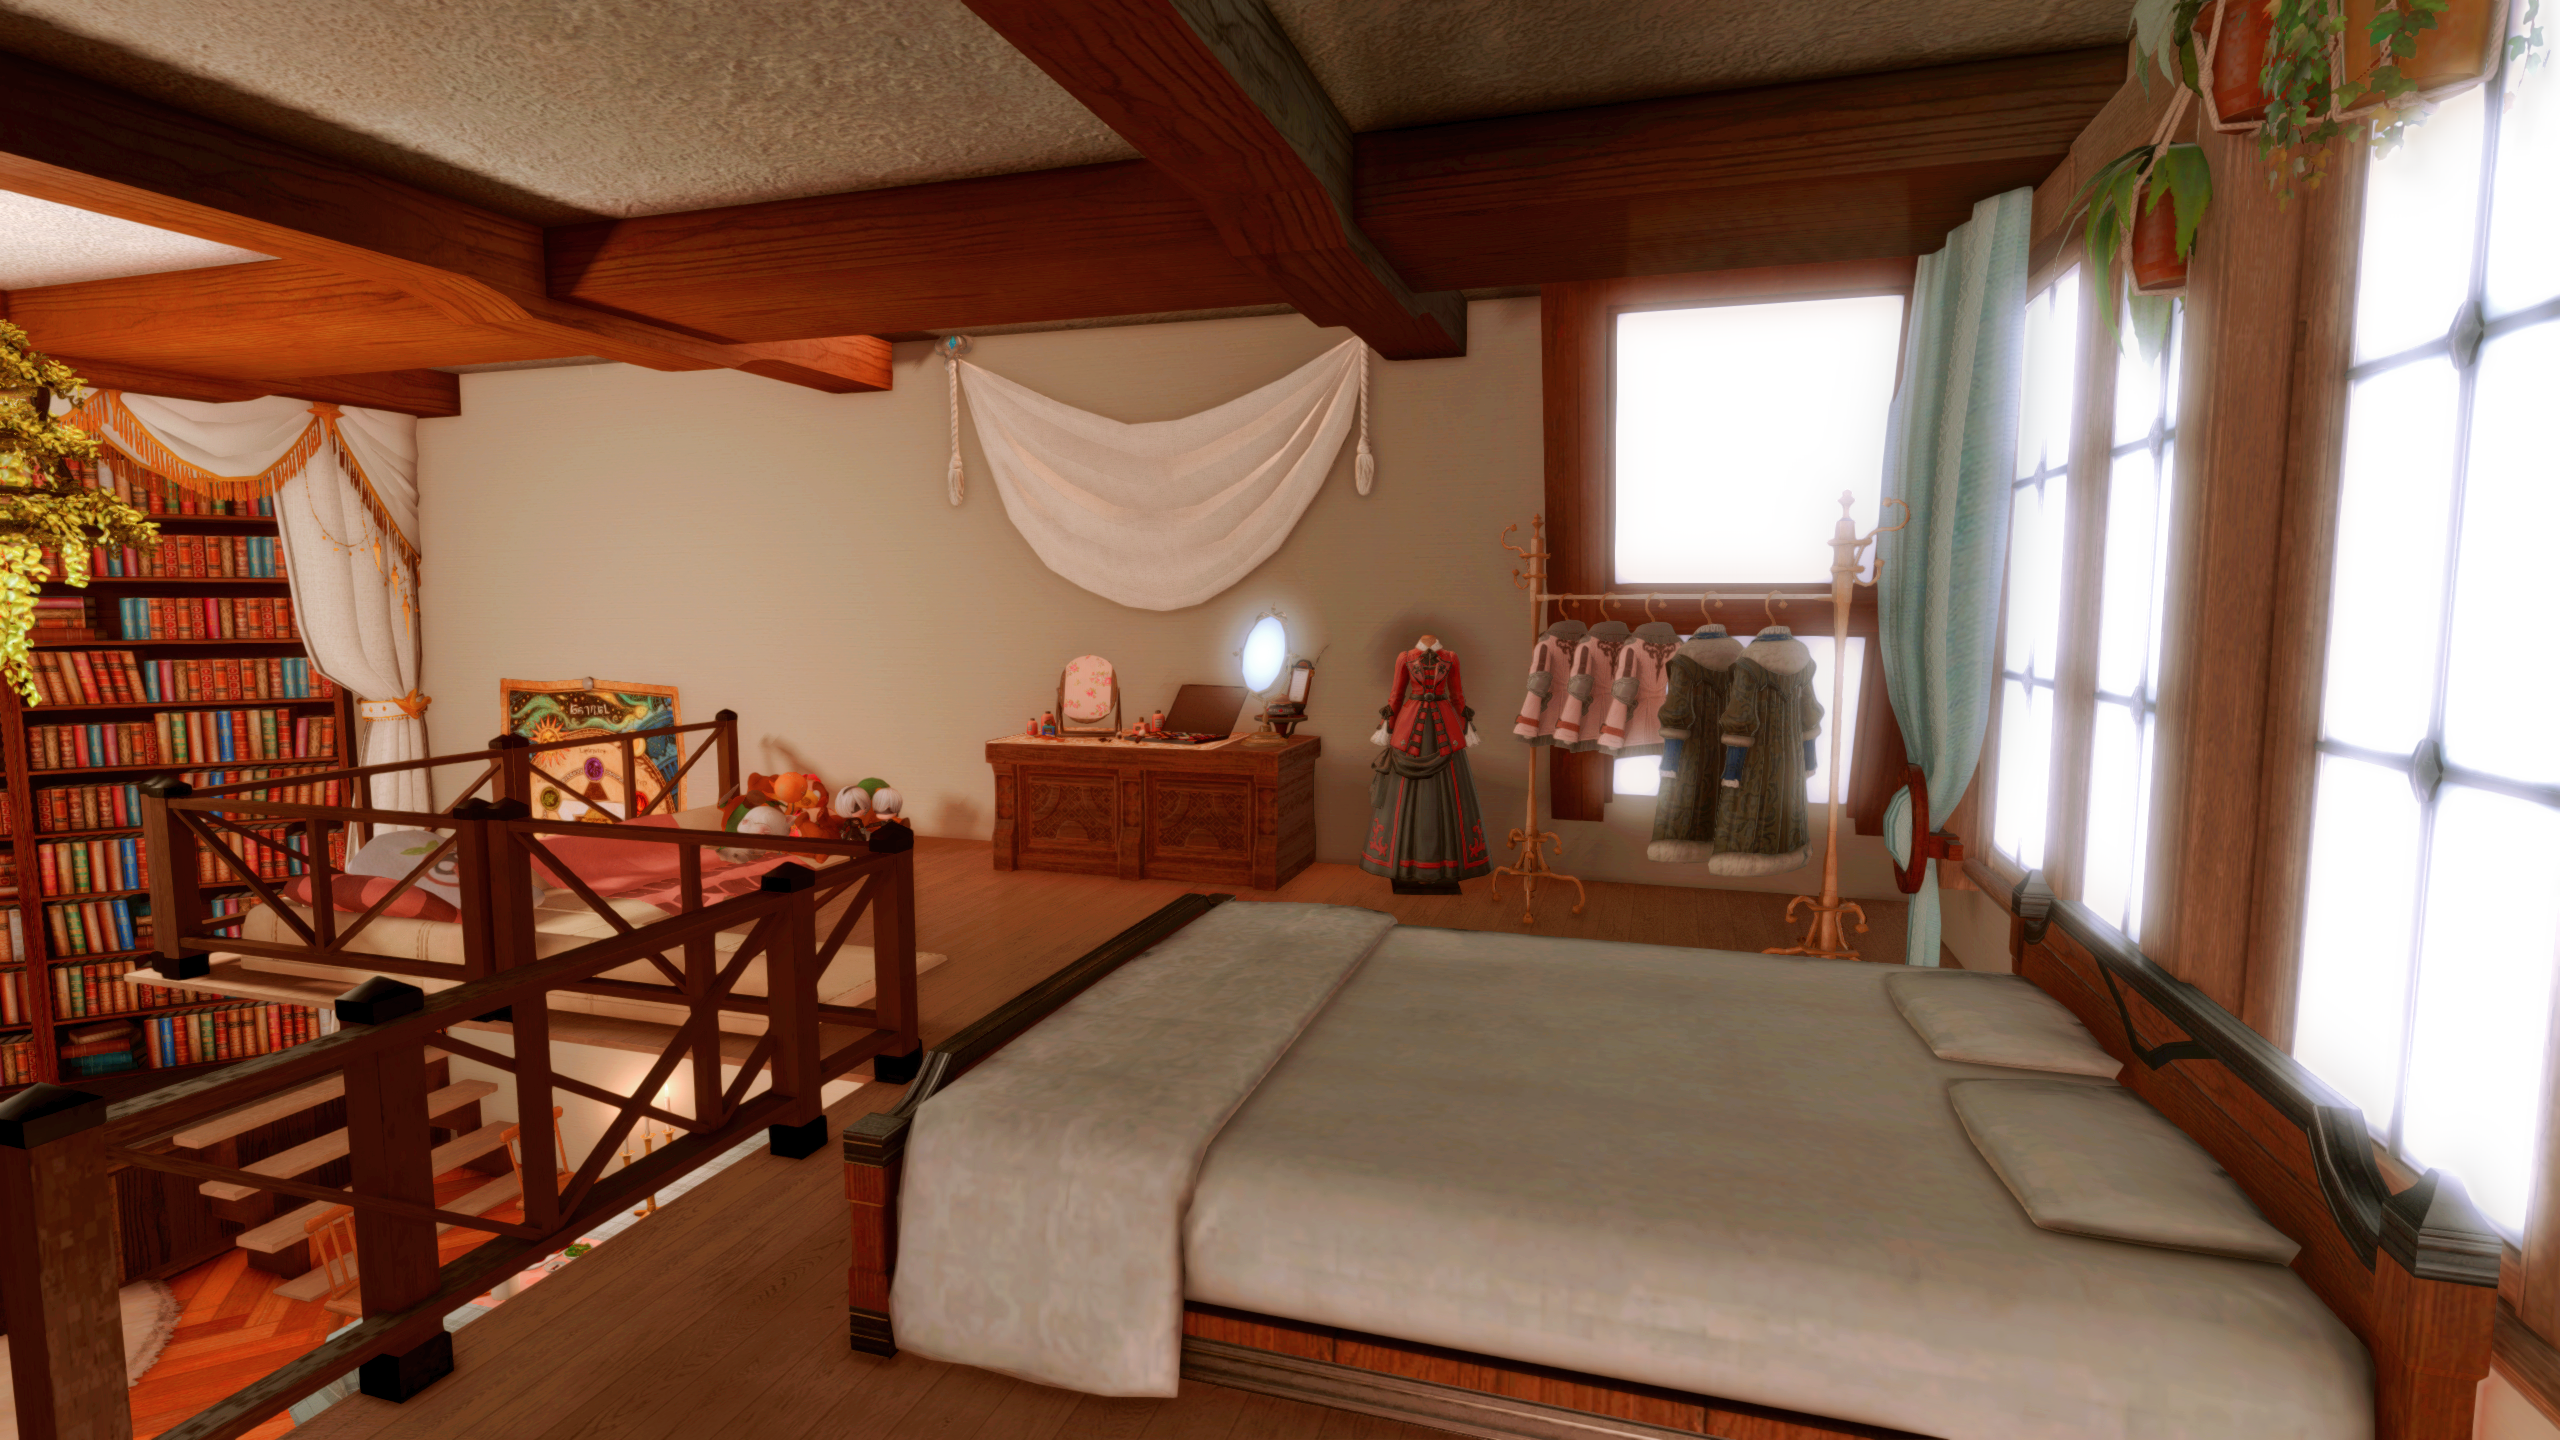 Final Fantasy 14 housing, a lofted area with a bed, drawers and sofa